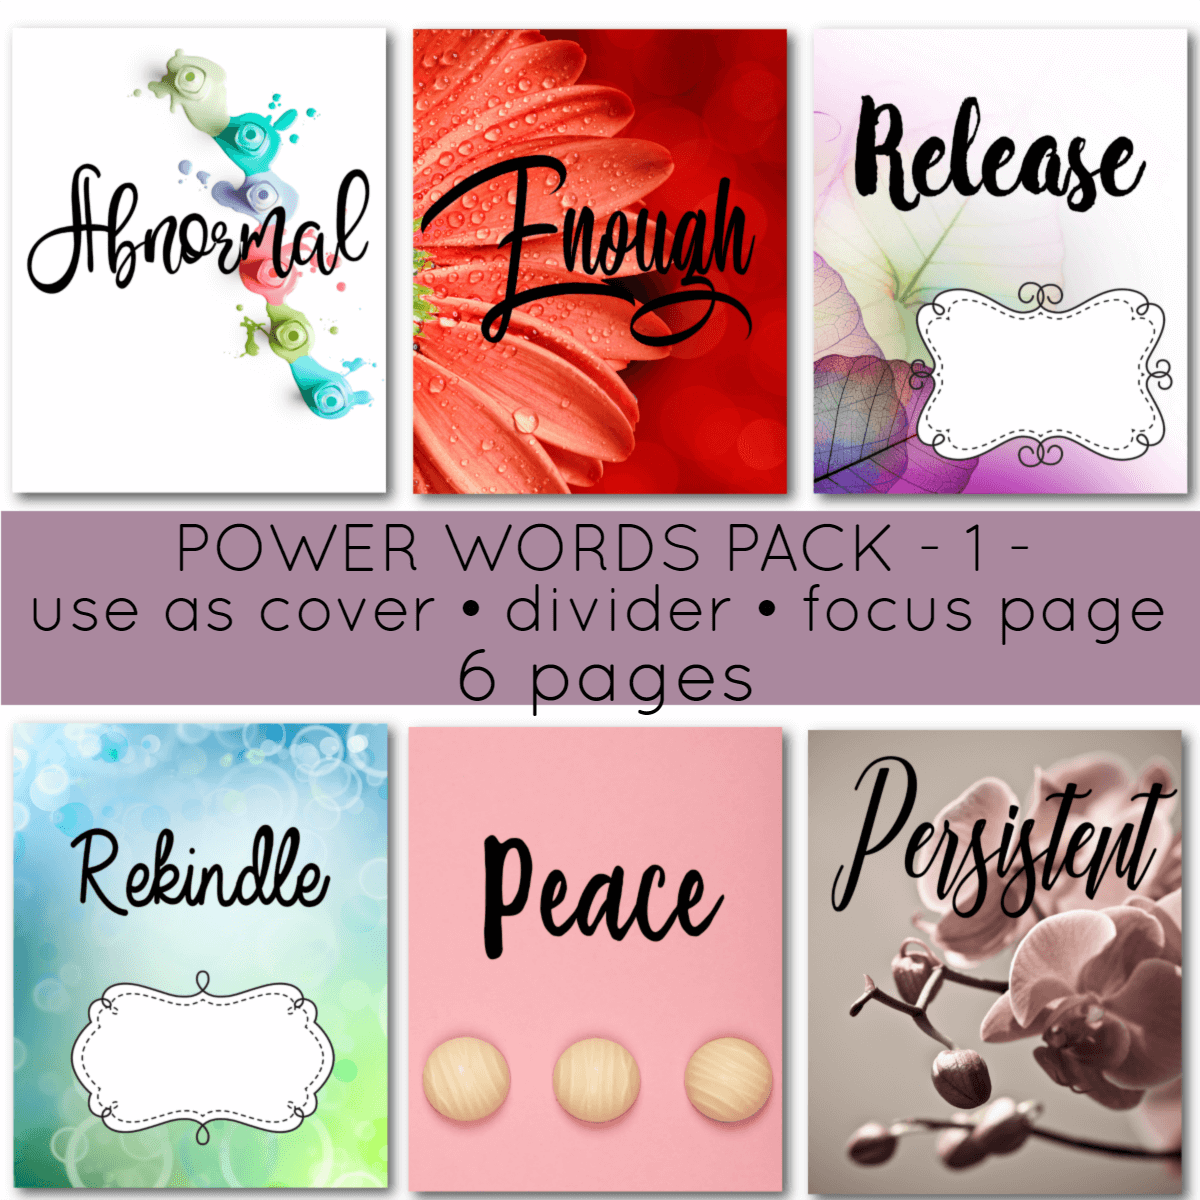 There is no denying the power of words to harness your thoughts. Now, put them in your homeschool planner. You’ll love these 6 pages of high quality images along with classical fonts for your 7 Step Homeschool Planner.